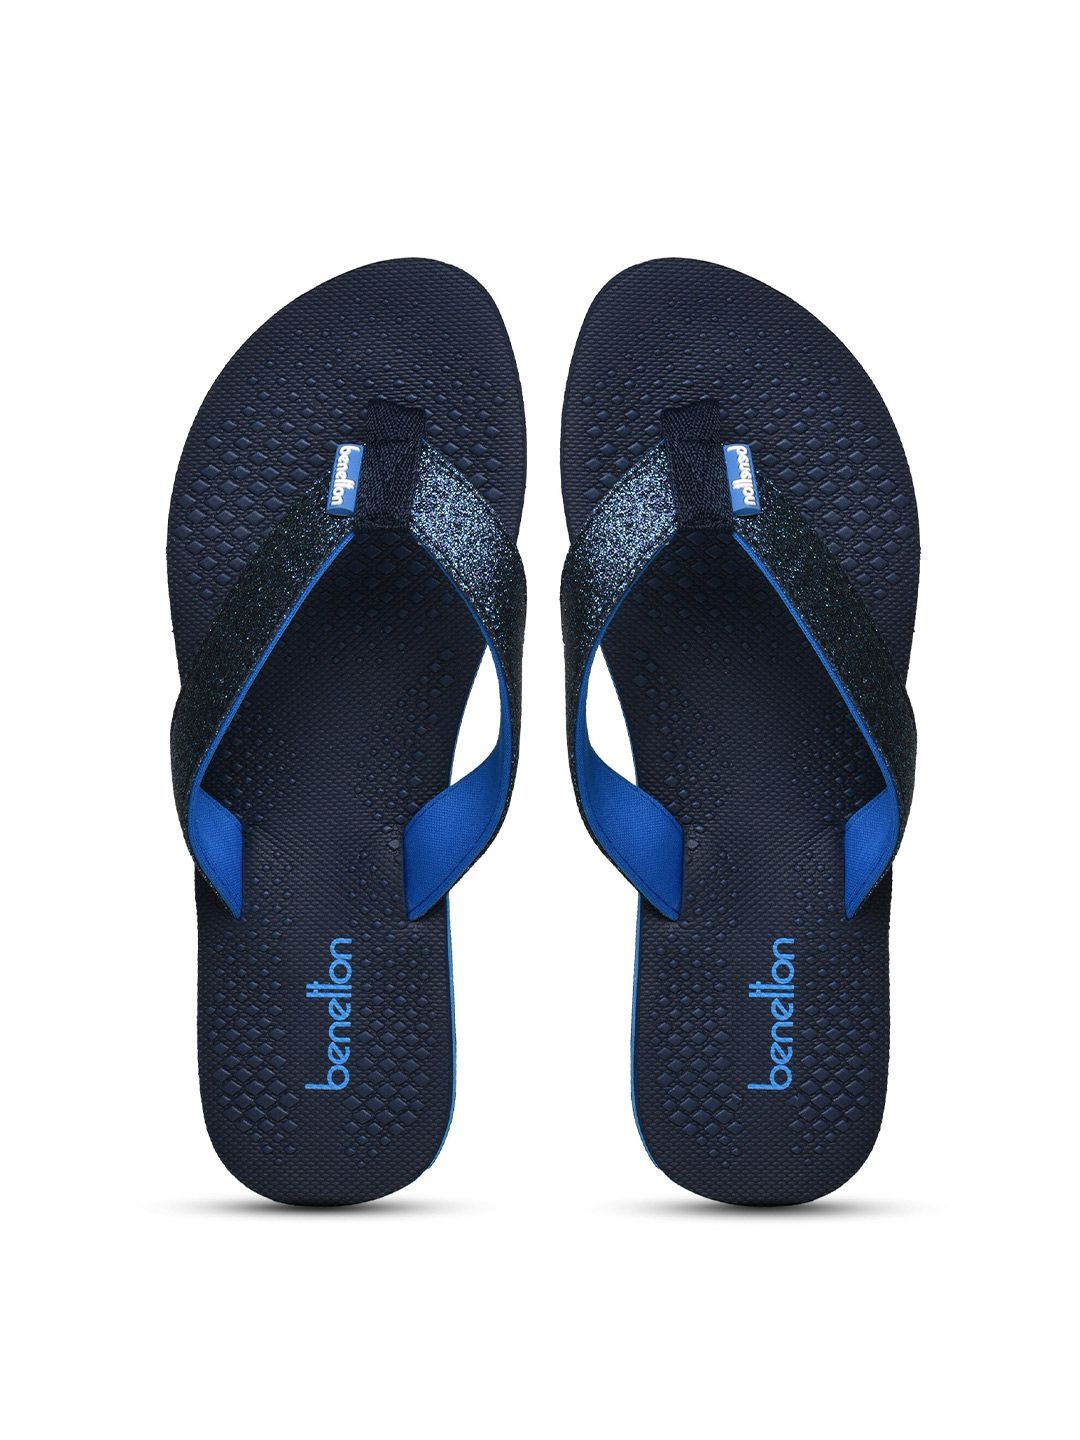 United Colors of Benetton Women Navy Blue & Black Printed Thong Flip-Flops Price in India